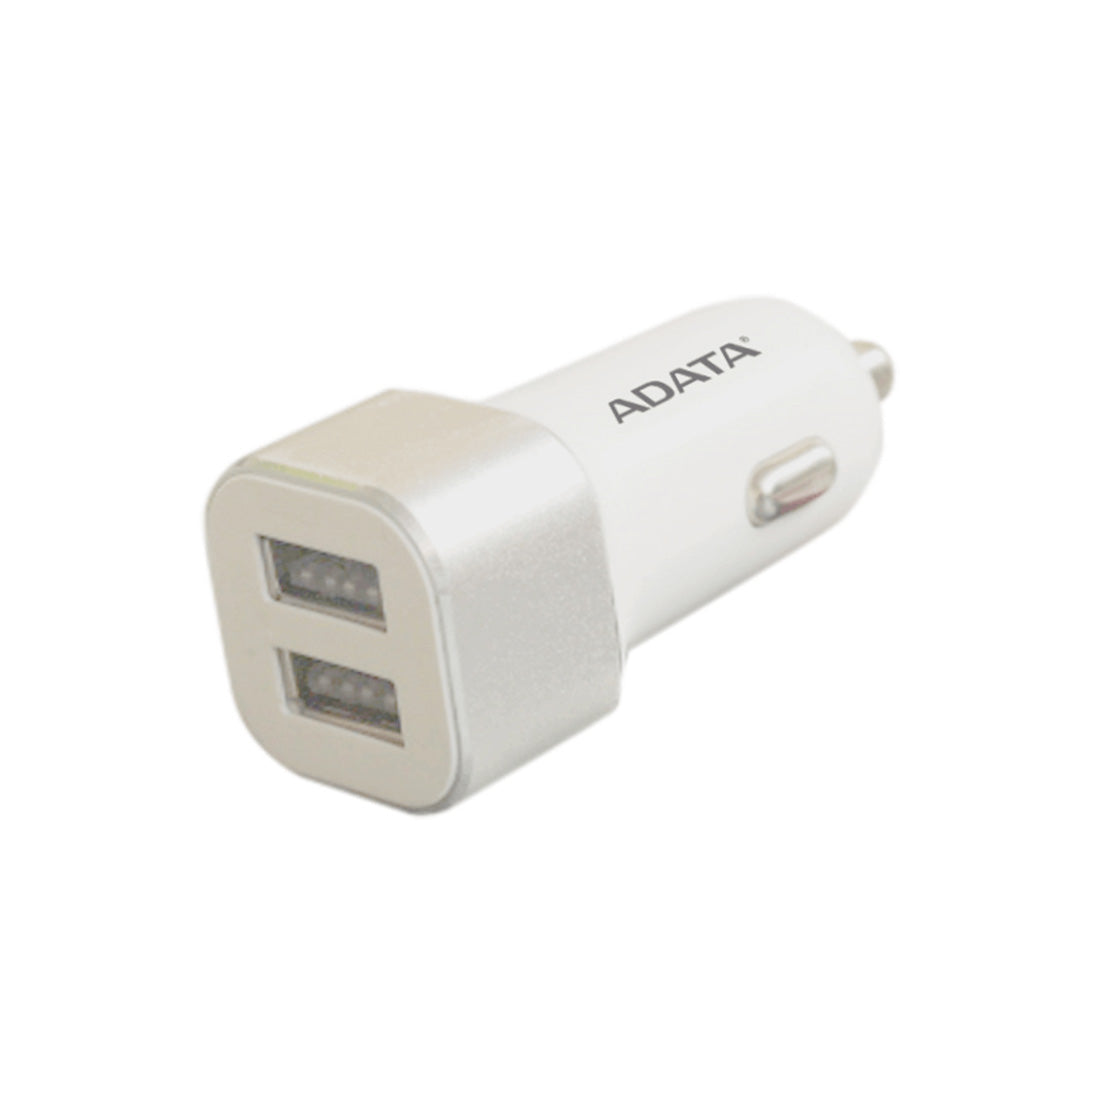 ADATA ADW-CC21 Dual USB Port 2.4A Car Charger with Over-Temperature Protection - White